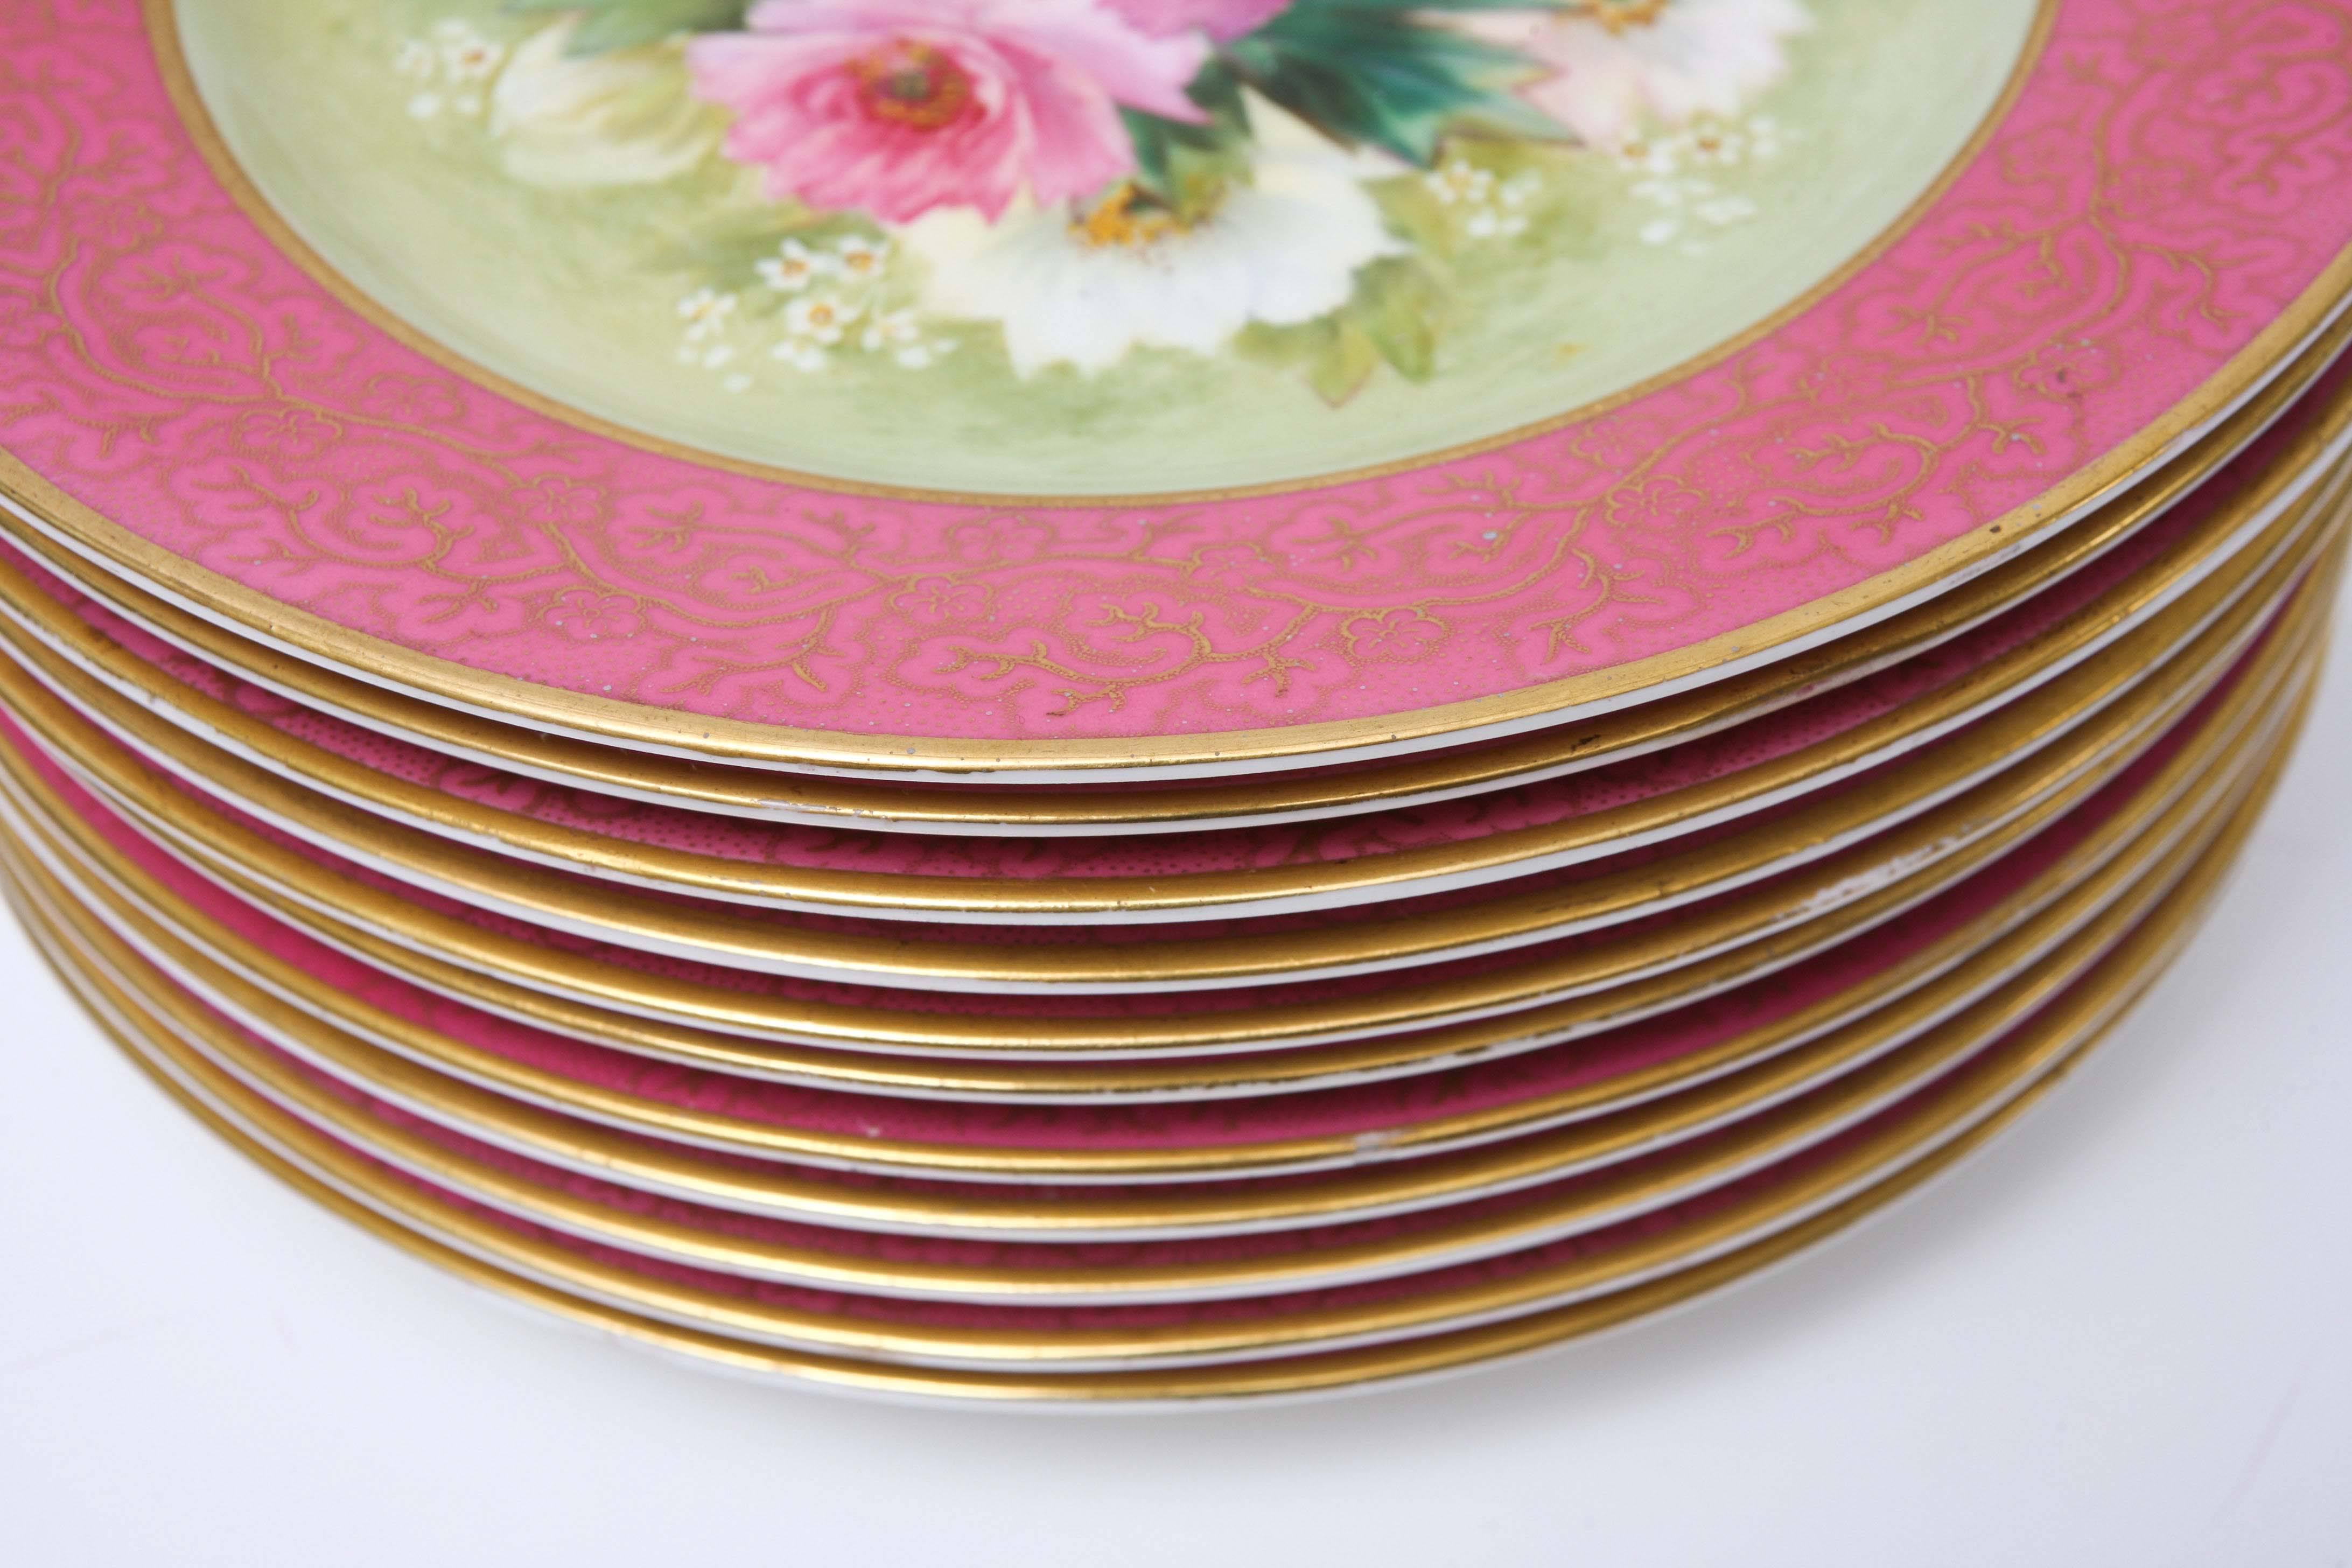 Hand-Crafted 12 Pretty Pink Antique Floral Dessert Plates, Hand-Painted, Artist Signed